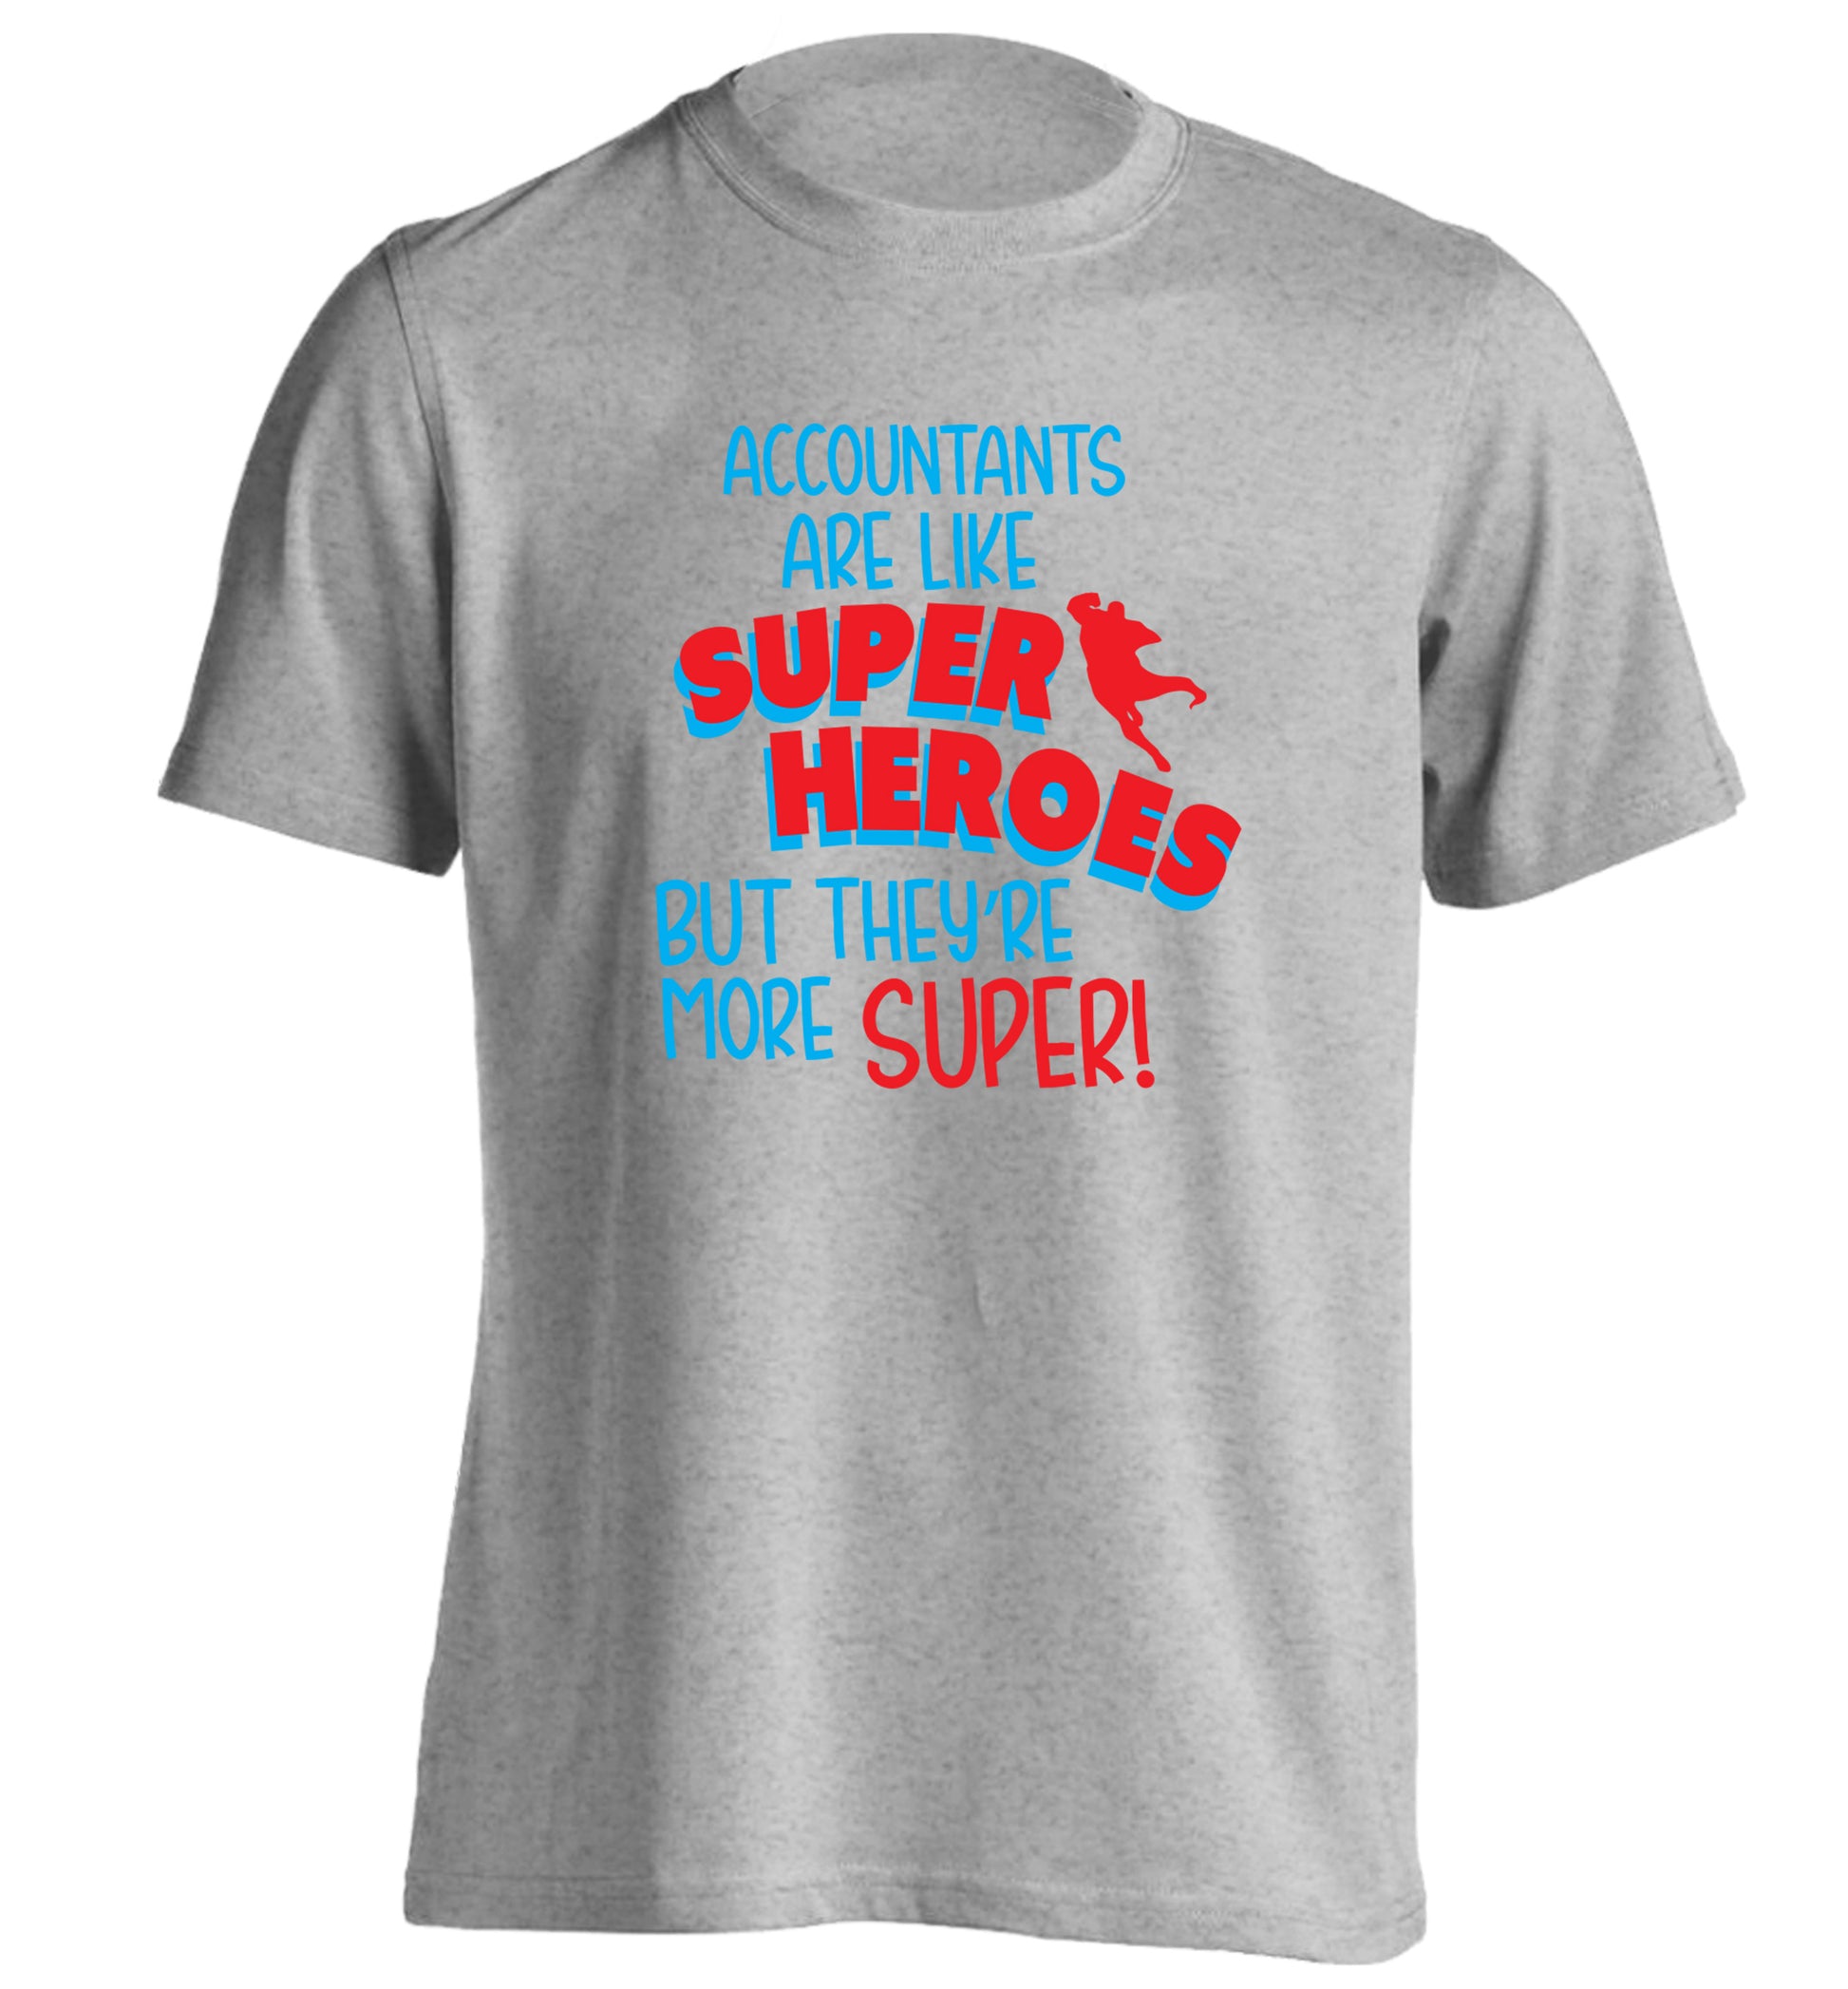 Accountants are like superheroes but they're more super adults unisex grey Tshirt 2XL